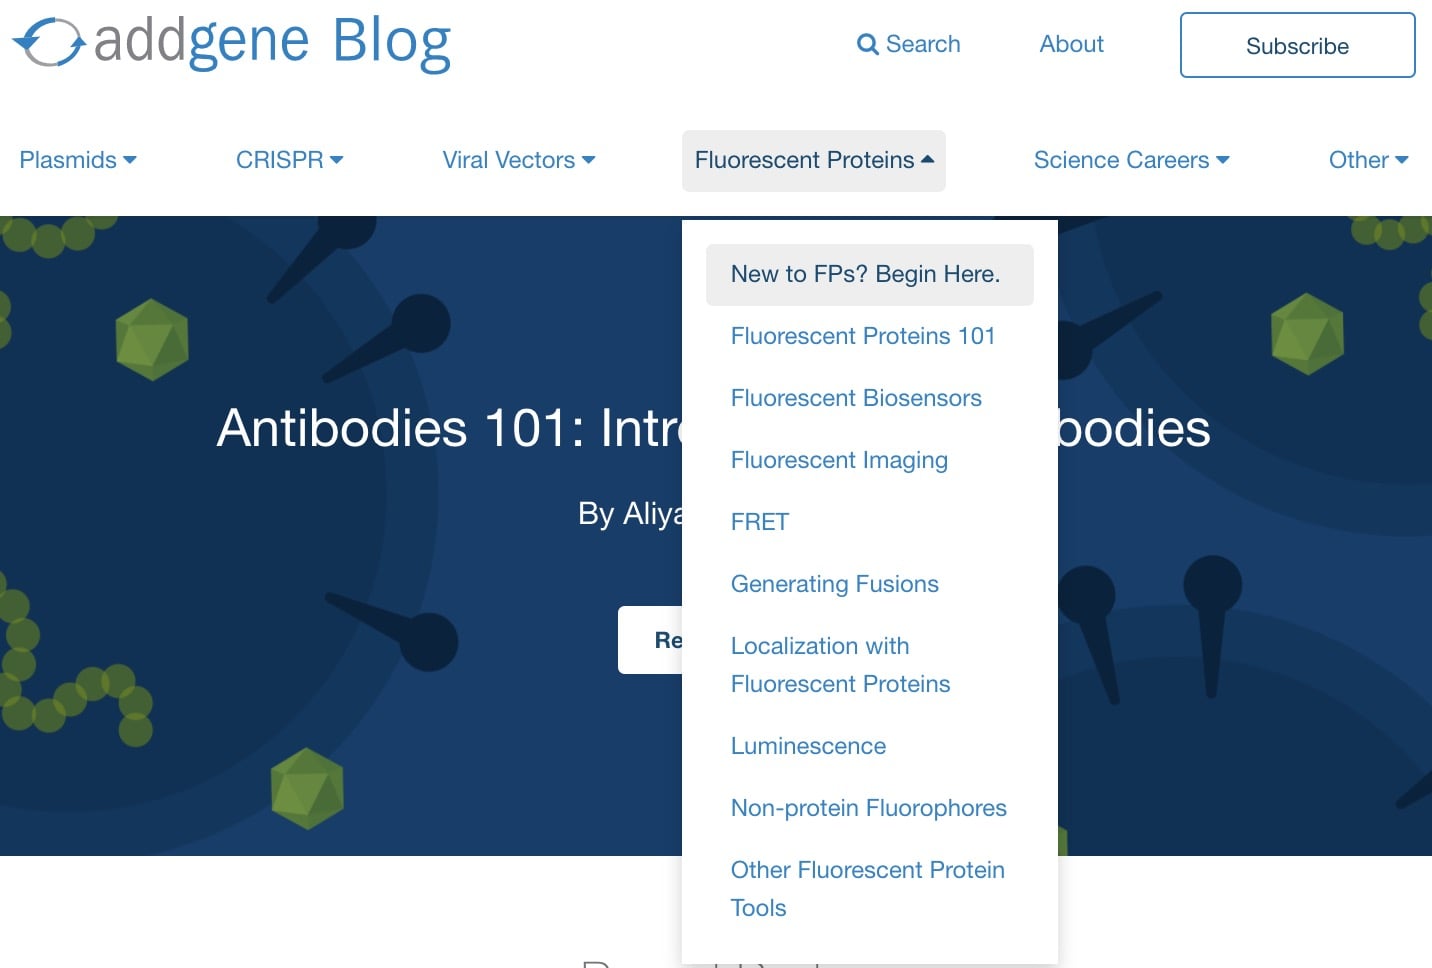 Screenshot of the Addgene blog with a large blue banner in the background and a menu that pops up in front of the banner.